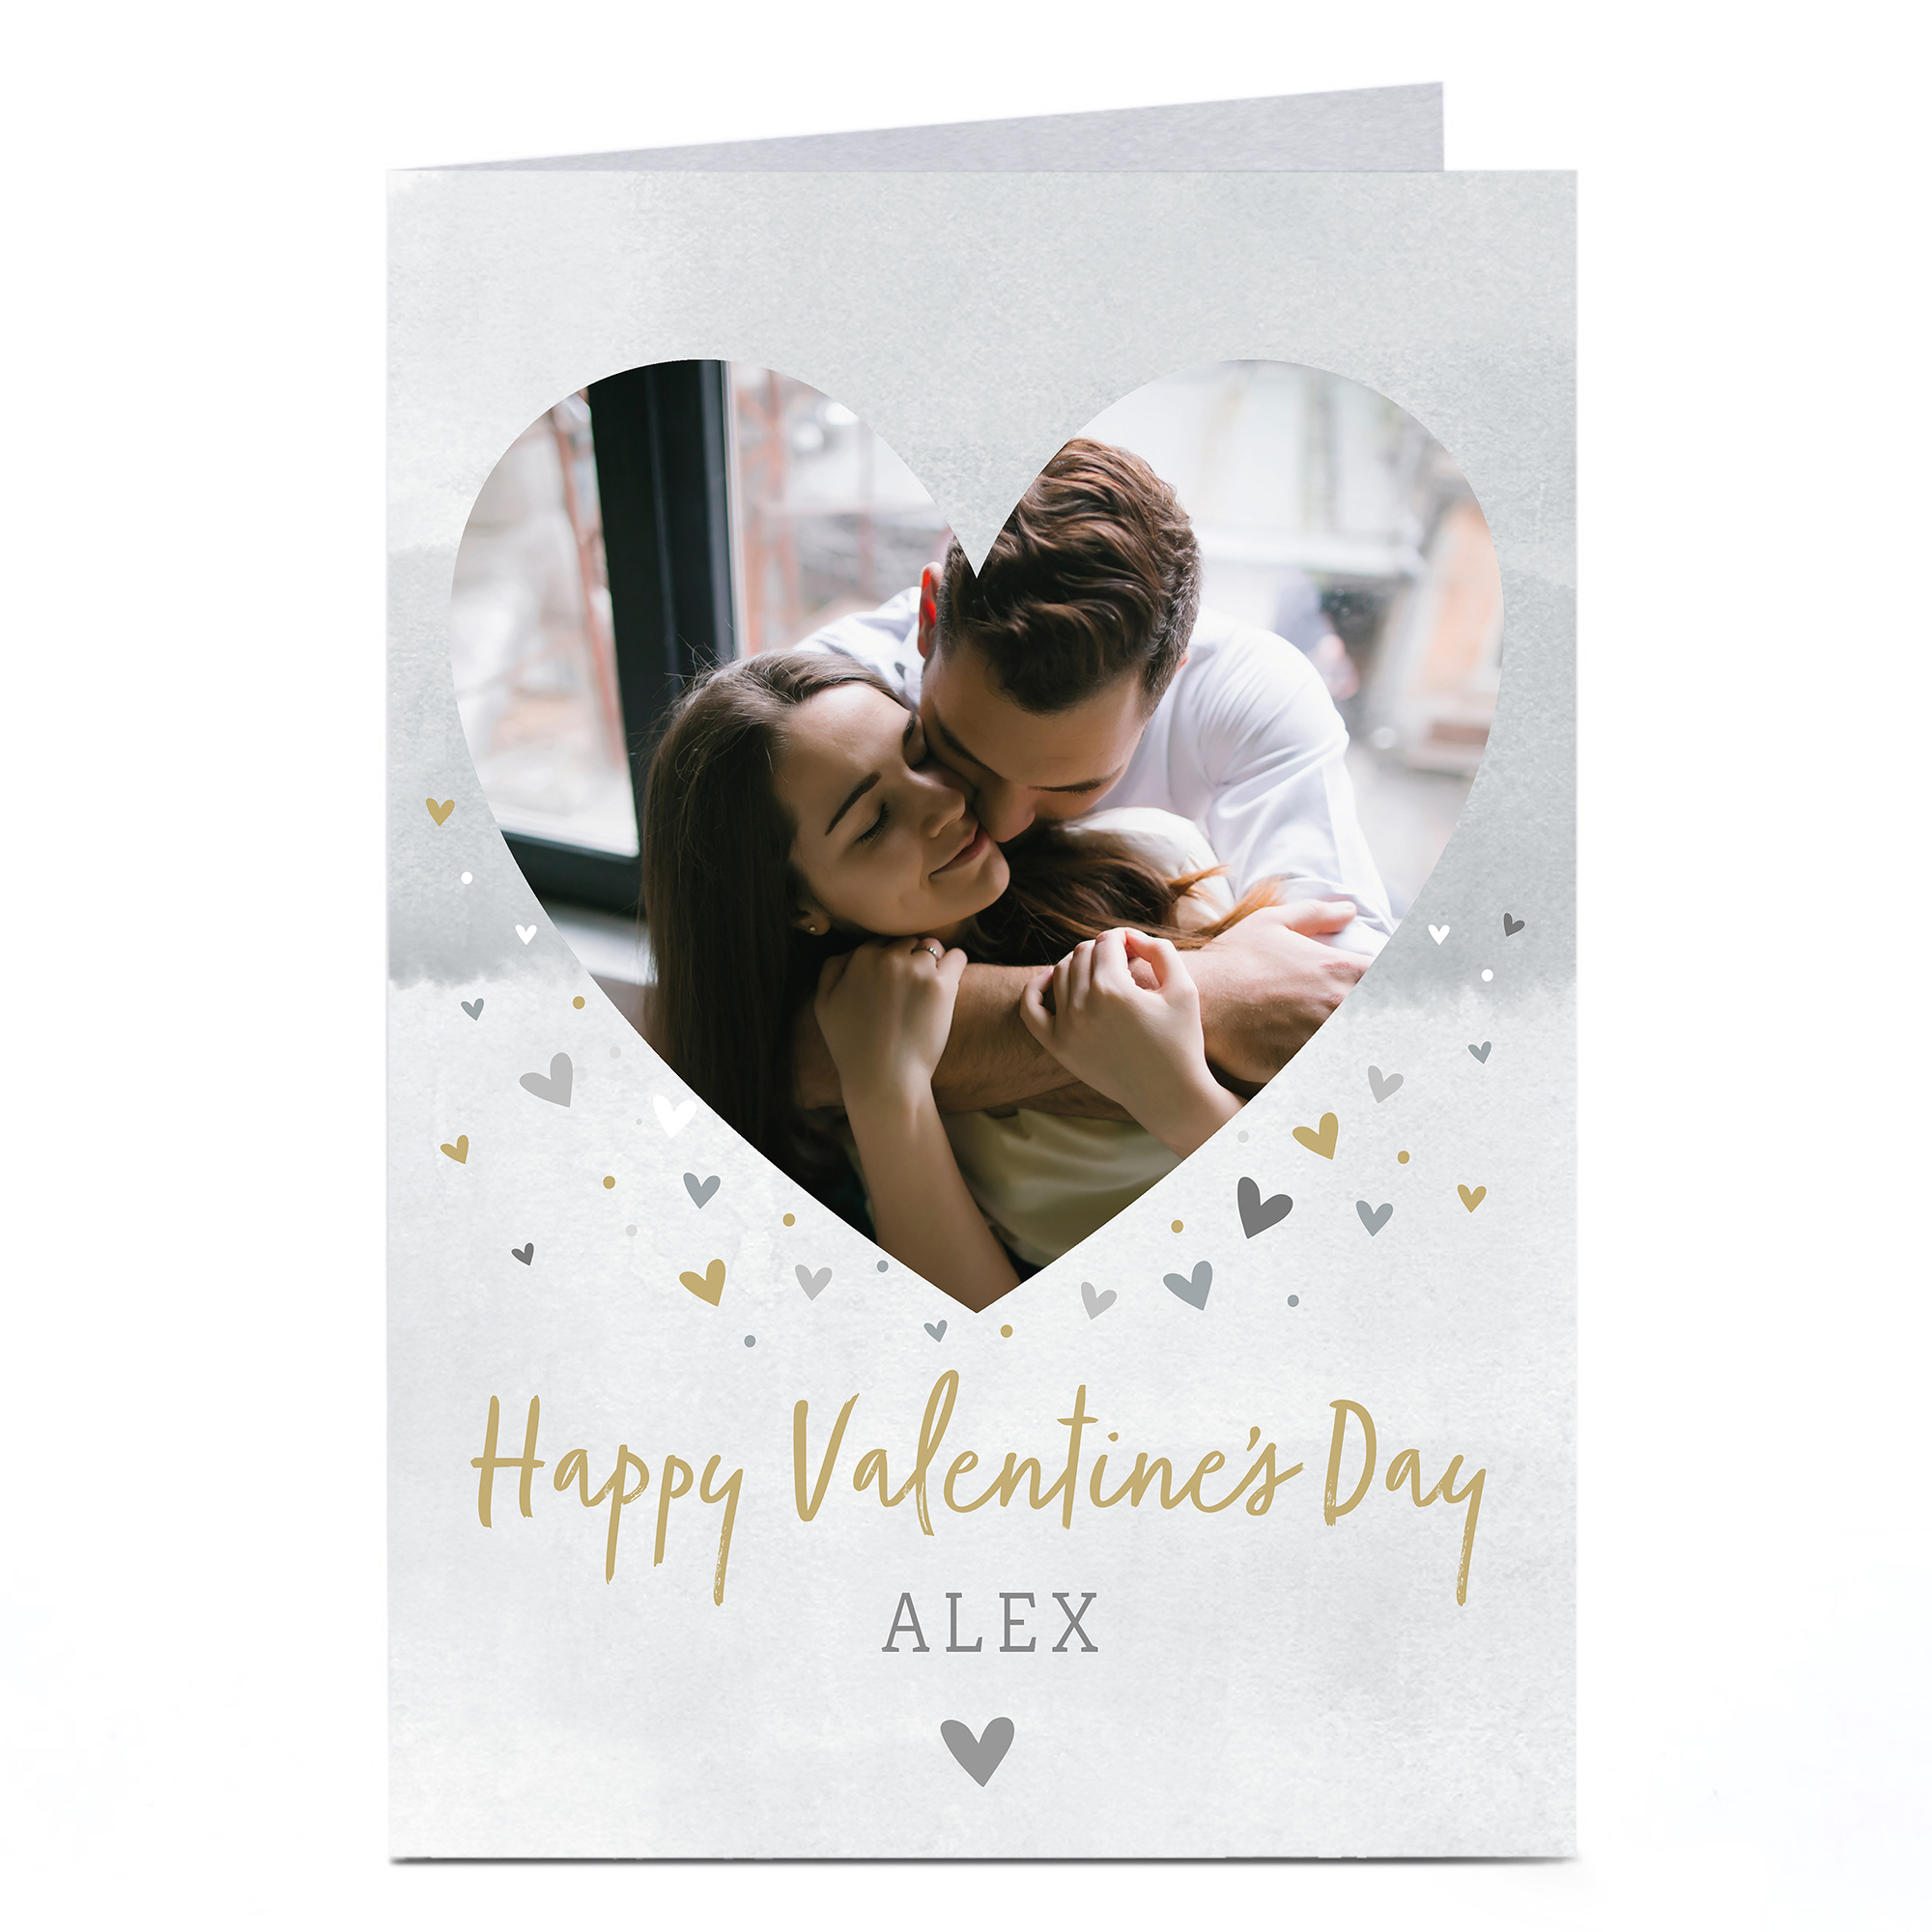 Personalised Photo Card - Valentine's Day, Any Name